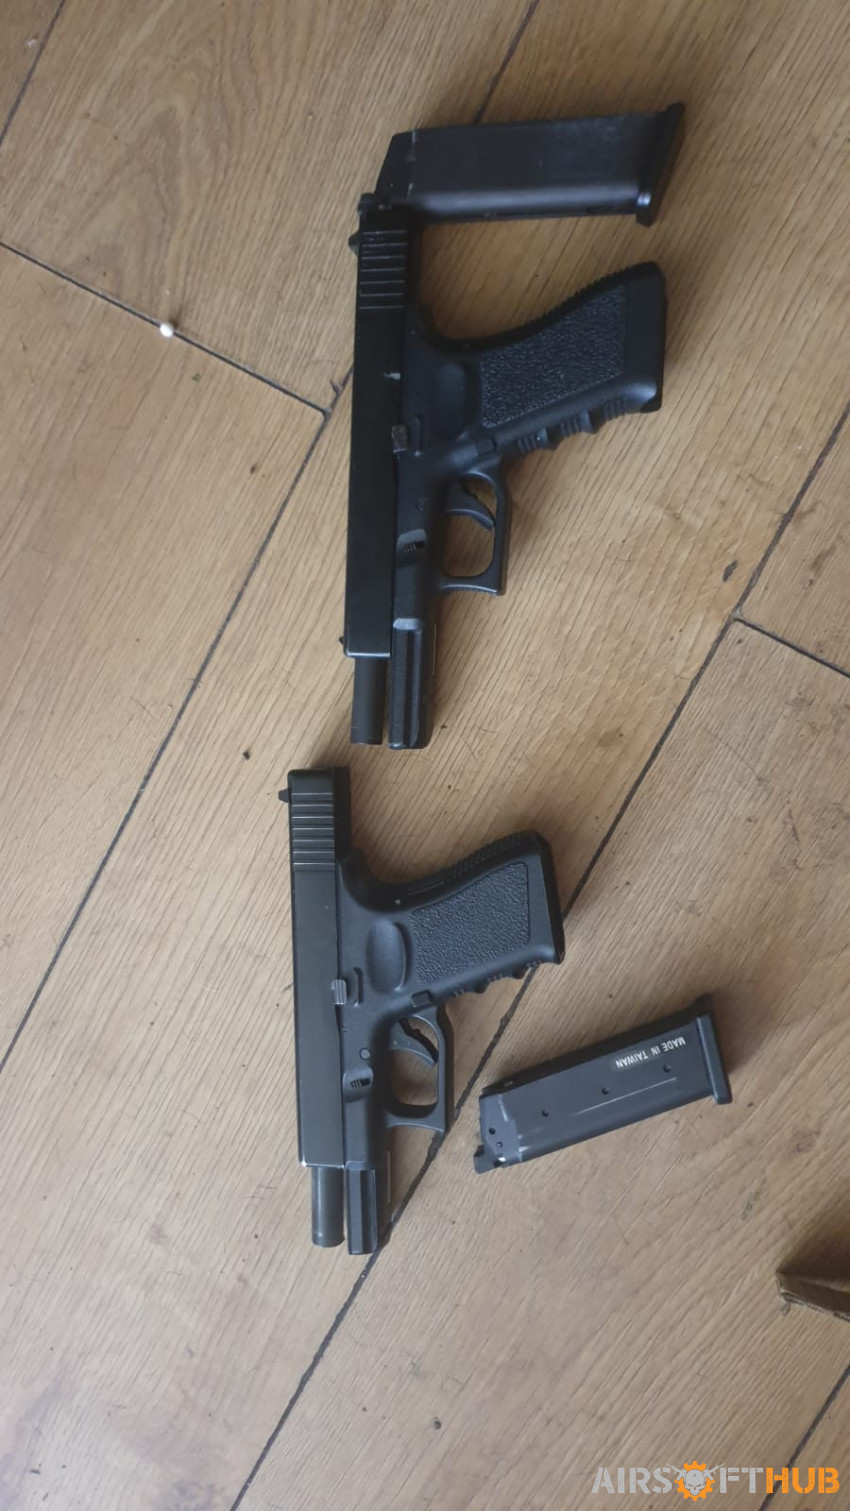 2 x asg glocks with mags - Used airsoft equipment